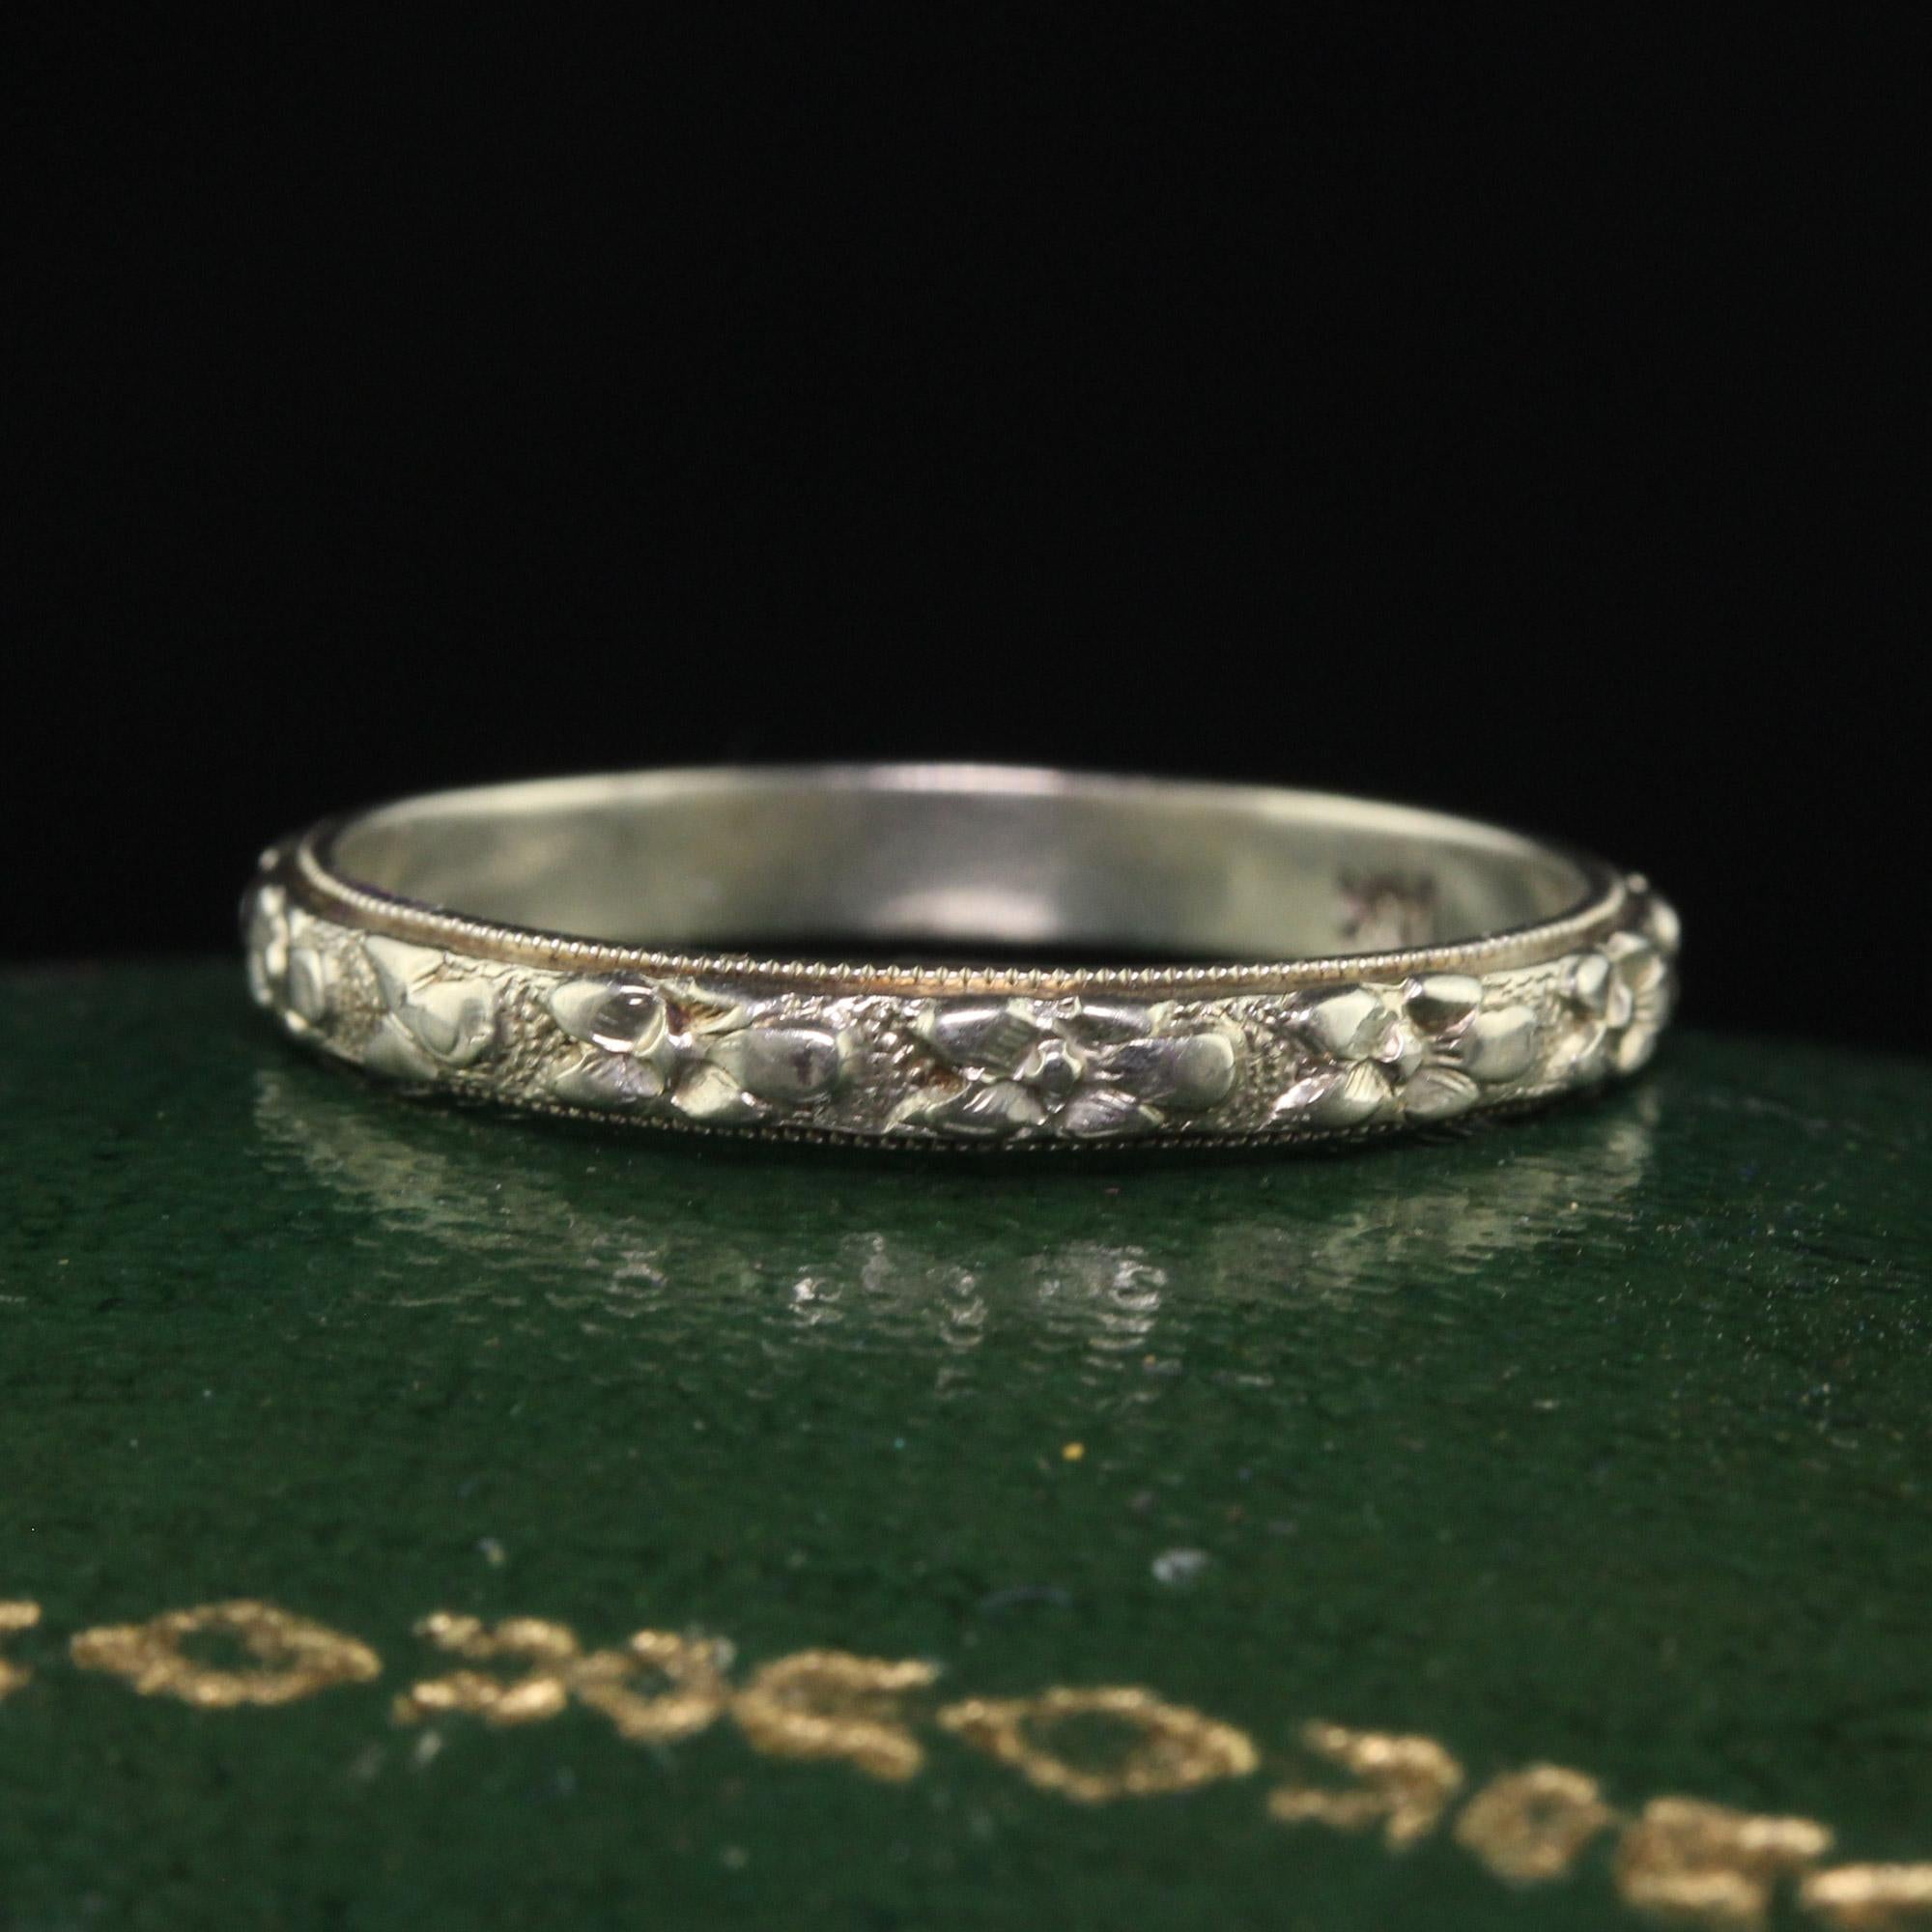 Beautiful Antique Art Deco 14K White Gold Floral Engraved Wedding Band - Size 6. This gorgeous wedding band is crafted in 14k white gold. The floral design is deeply engraved around the entire band and is in great condition. This ring can also be